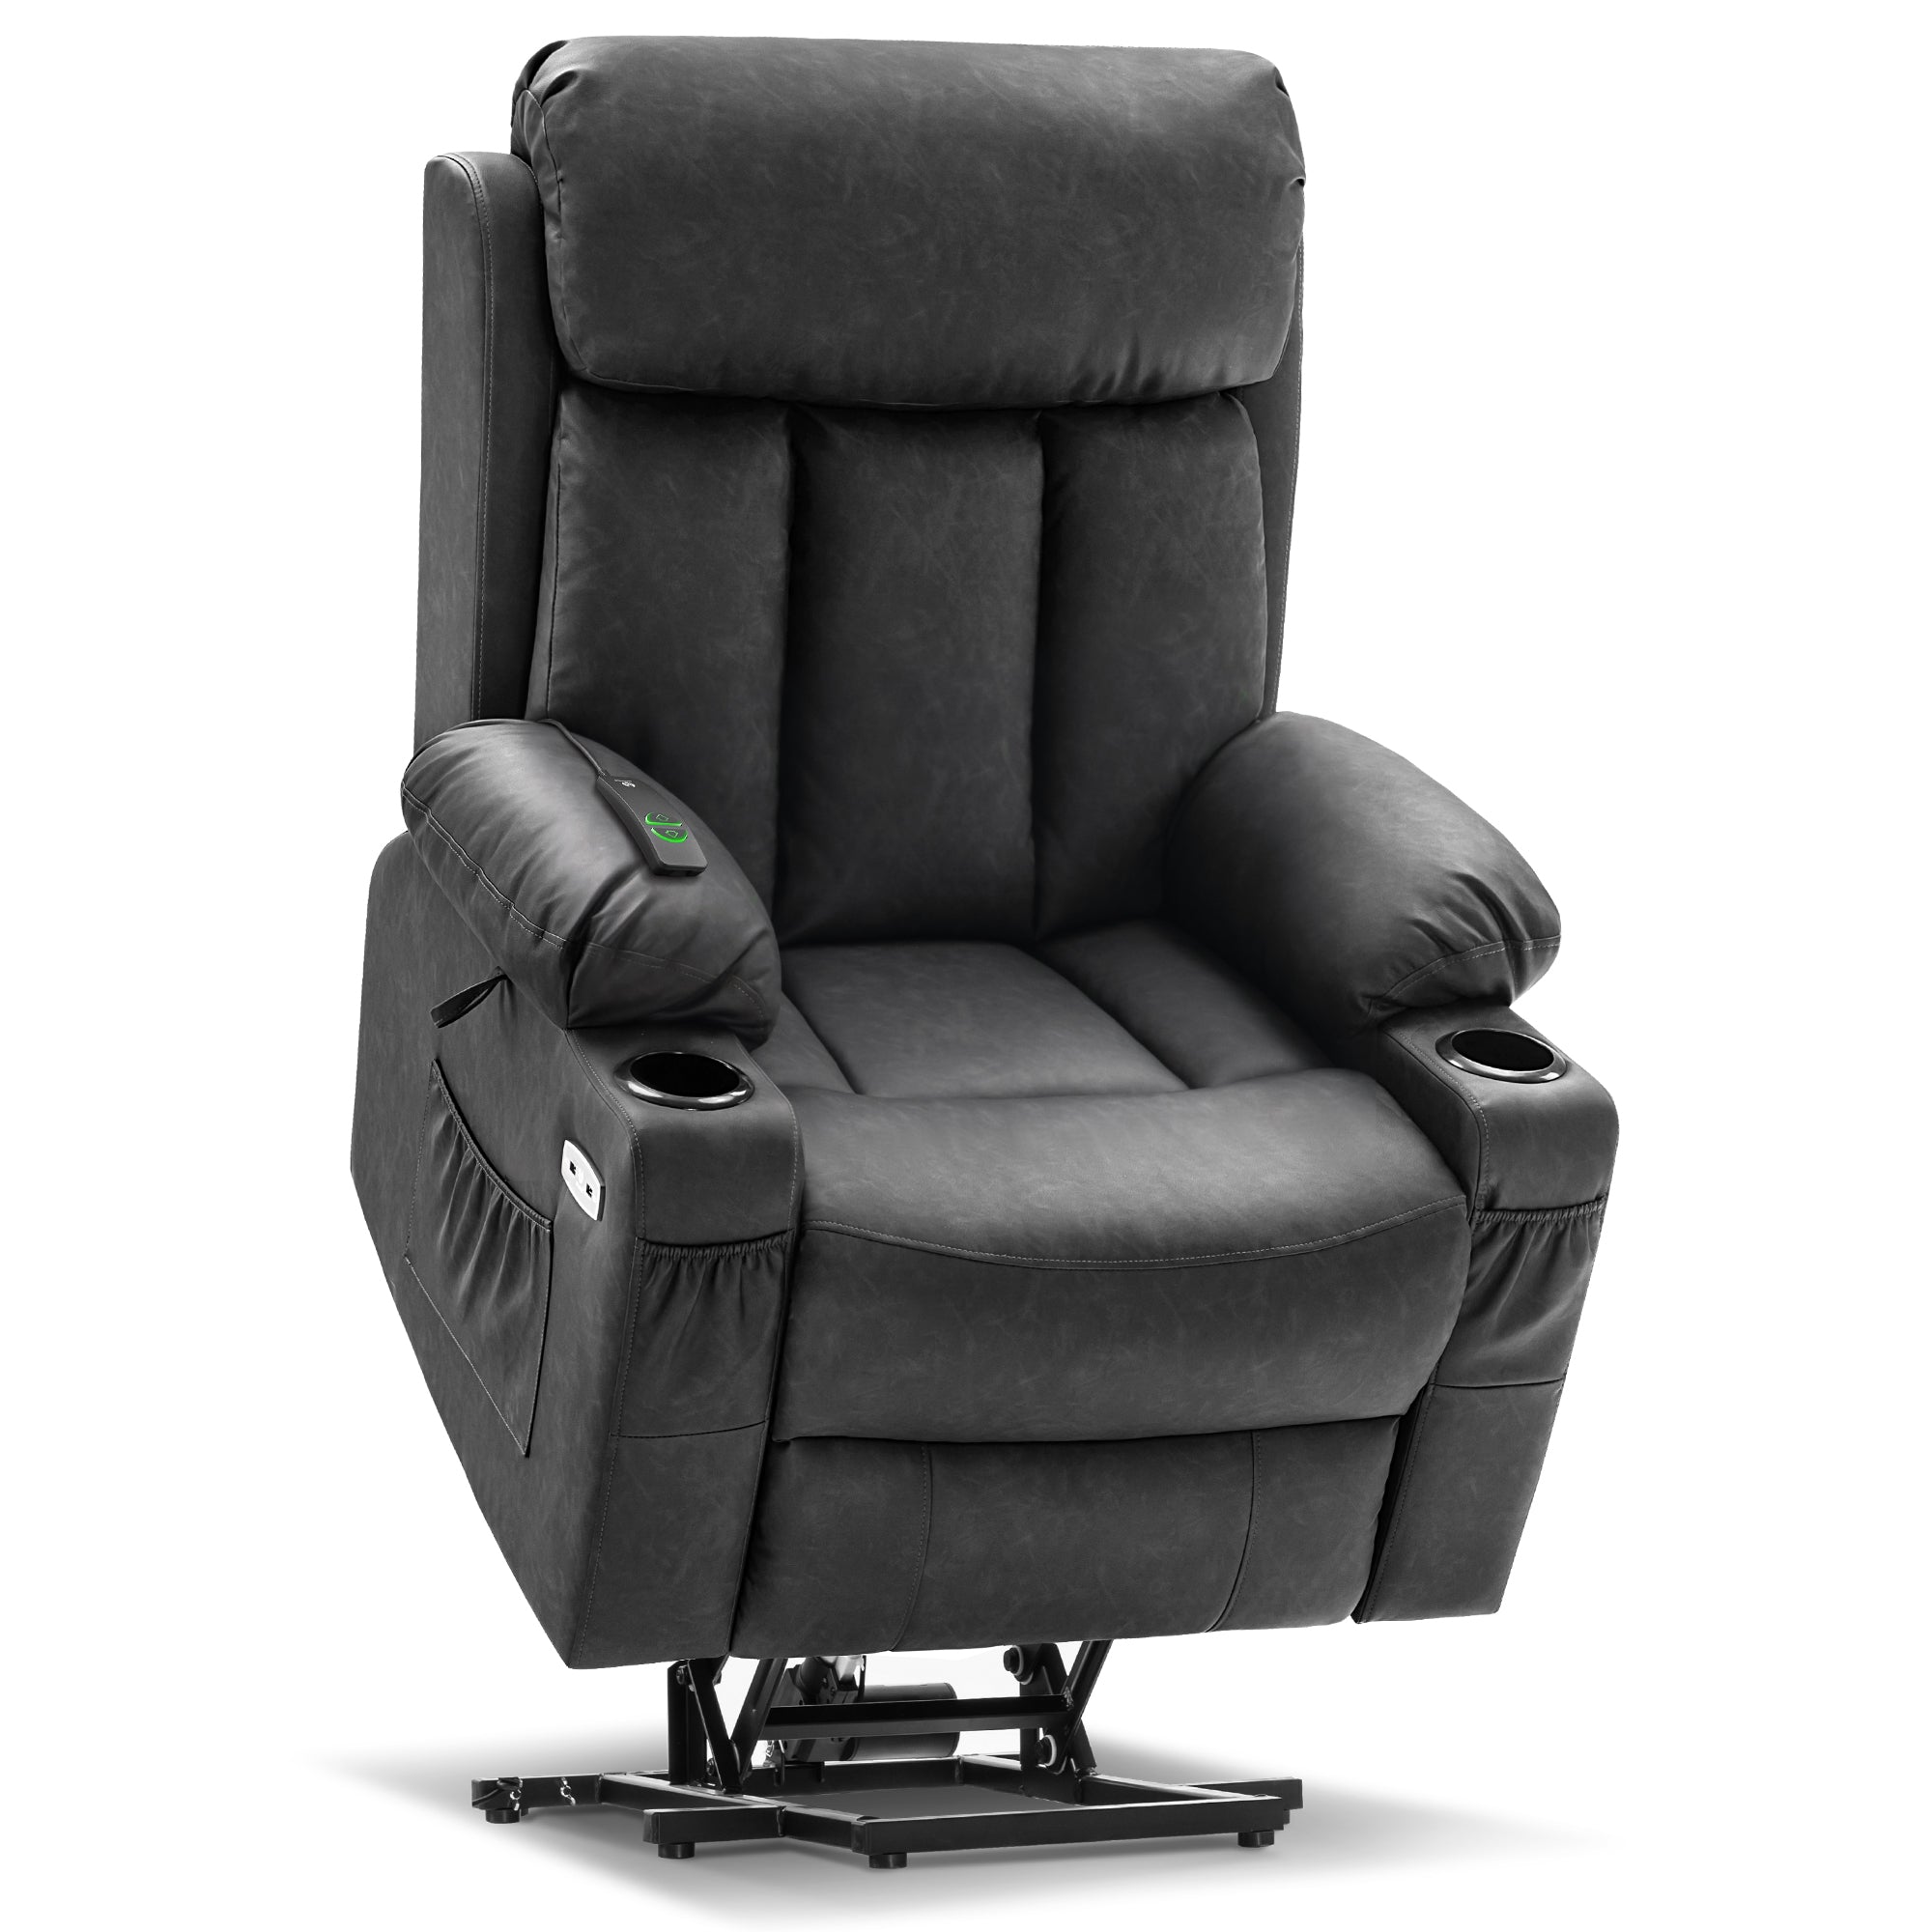 MCombo Large Electric Power Lift Recliner Chair with Extended Footrest for Big and Tall Elderly People, Hand Remote Control, Lumbar Pillow, USB Ports, 7426